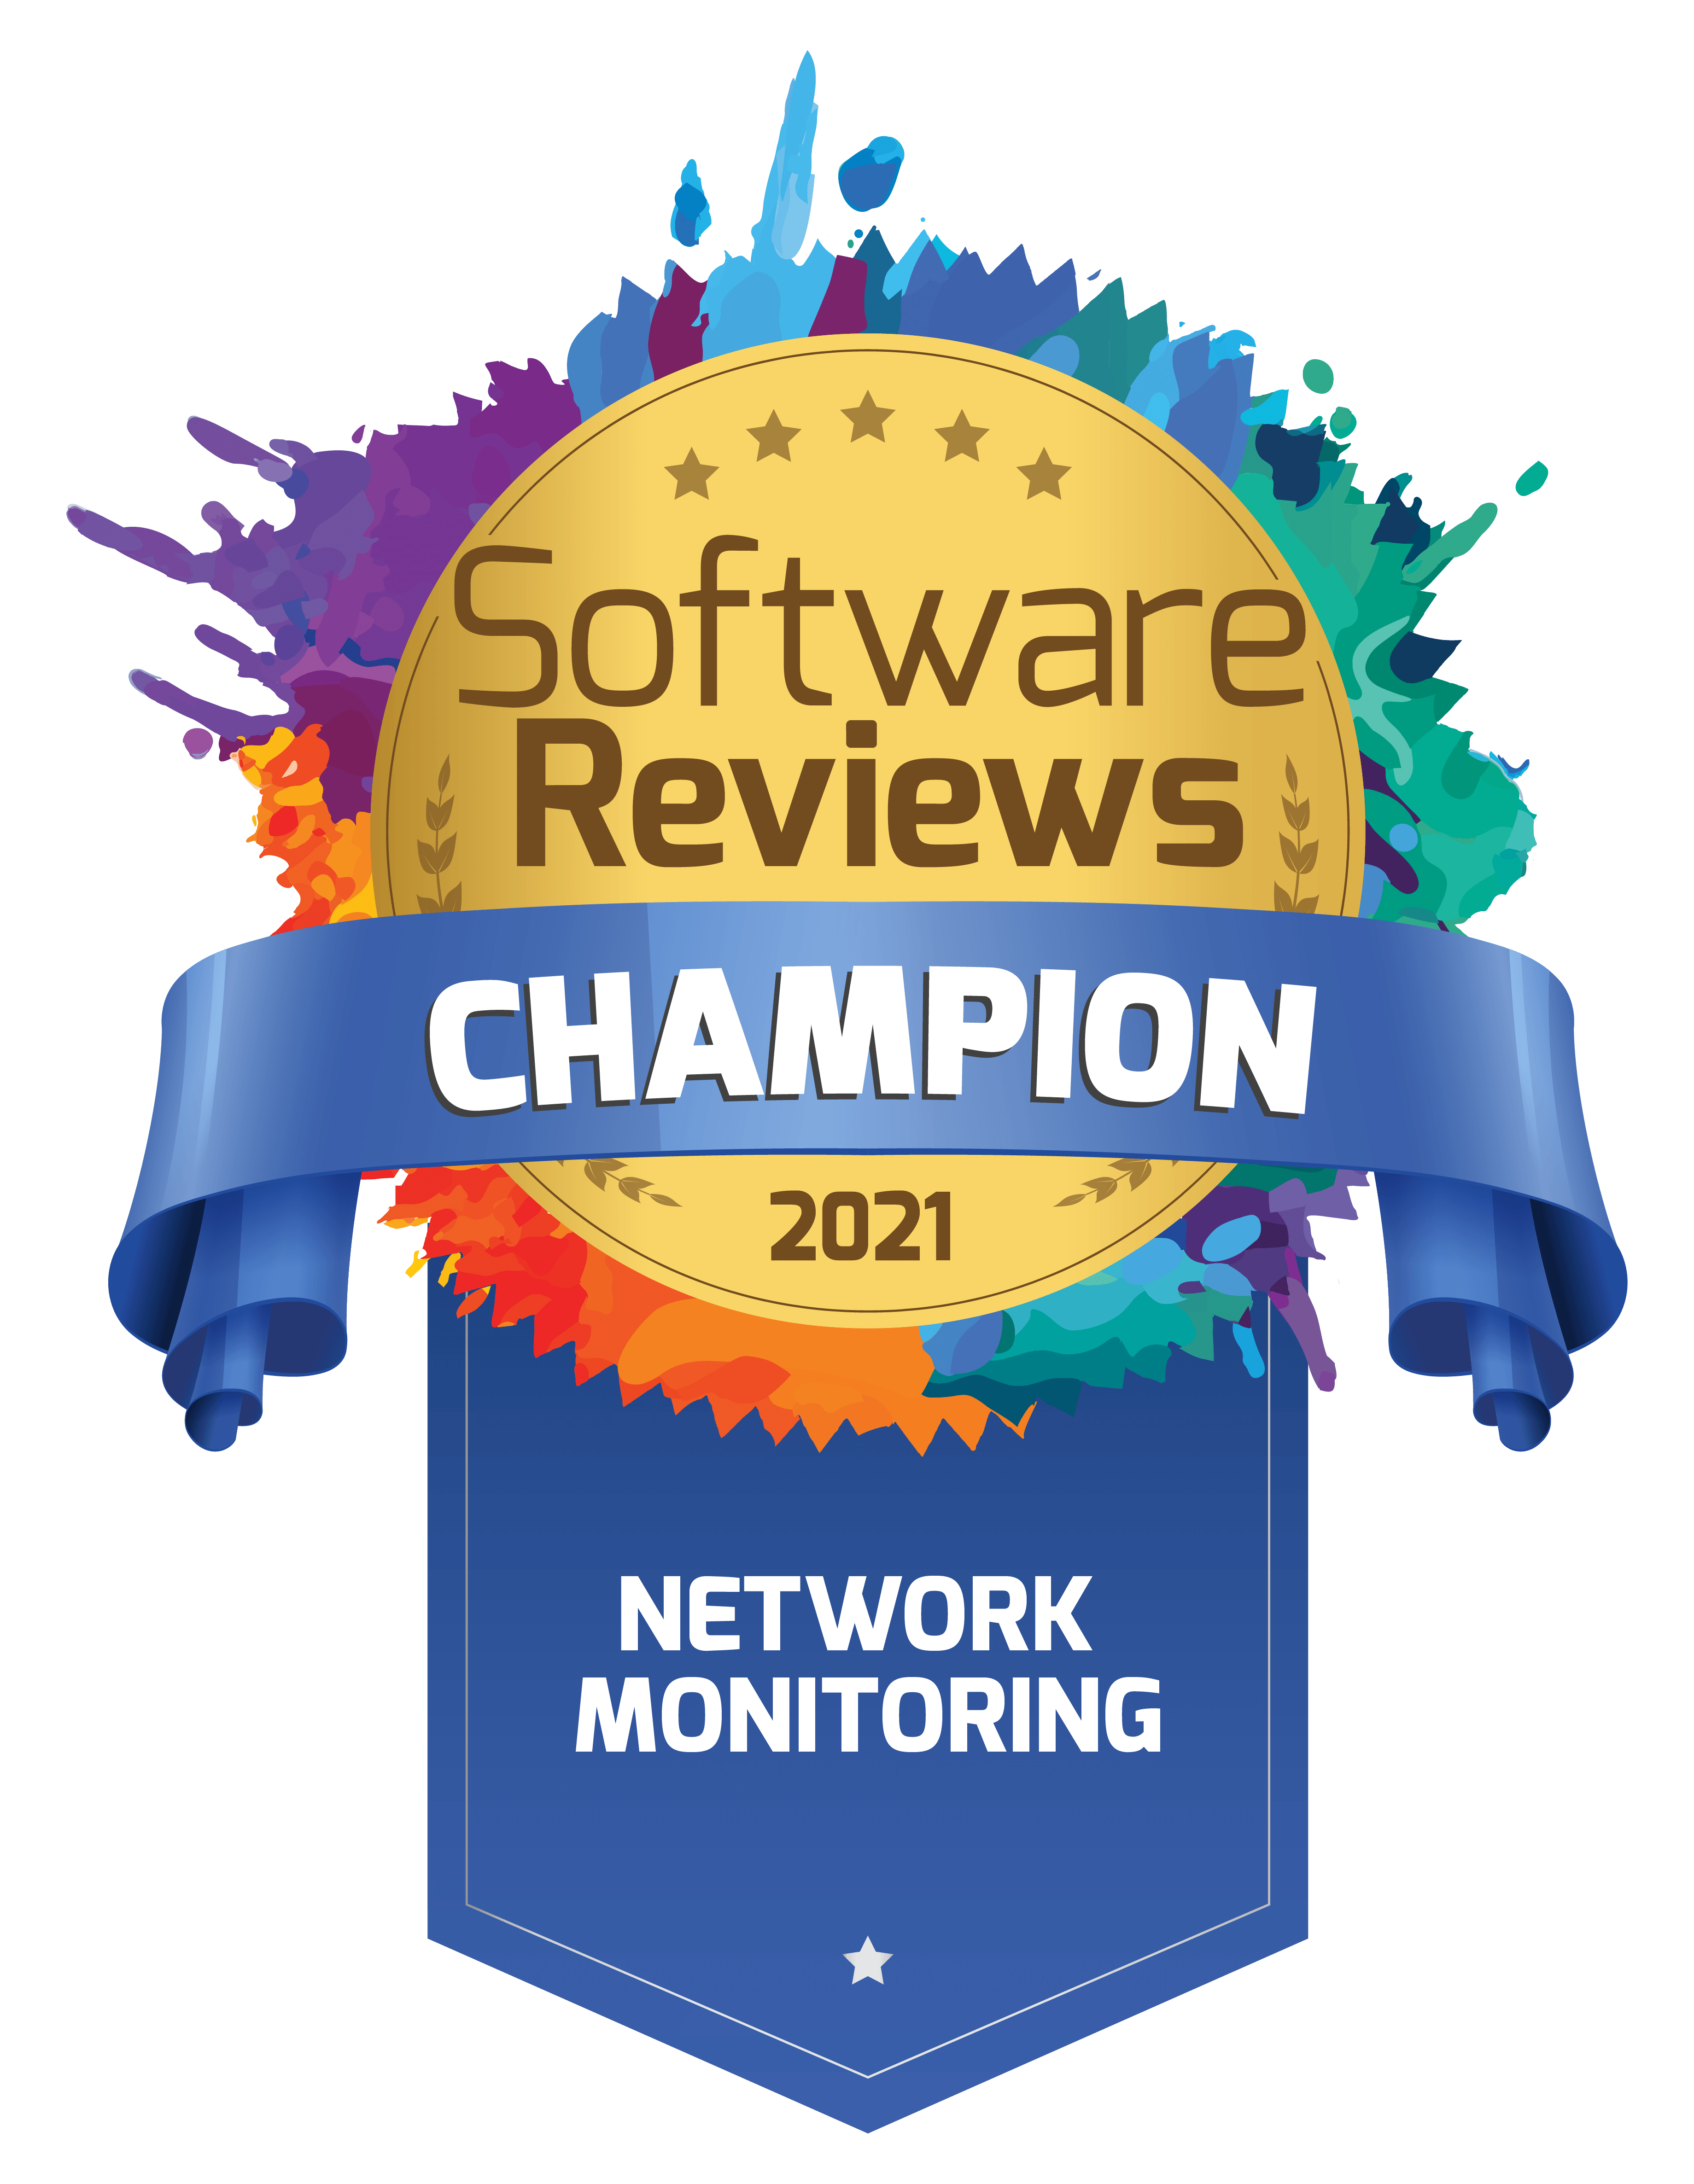 Medal for Software Reviews Network Monitoring Emotional Footprint Champion”